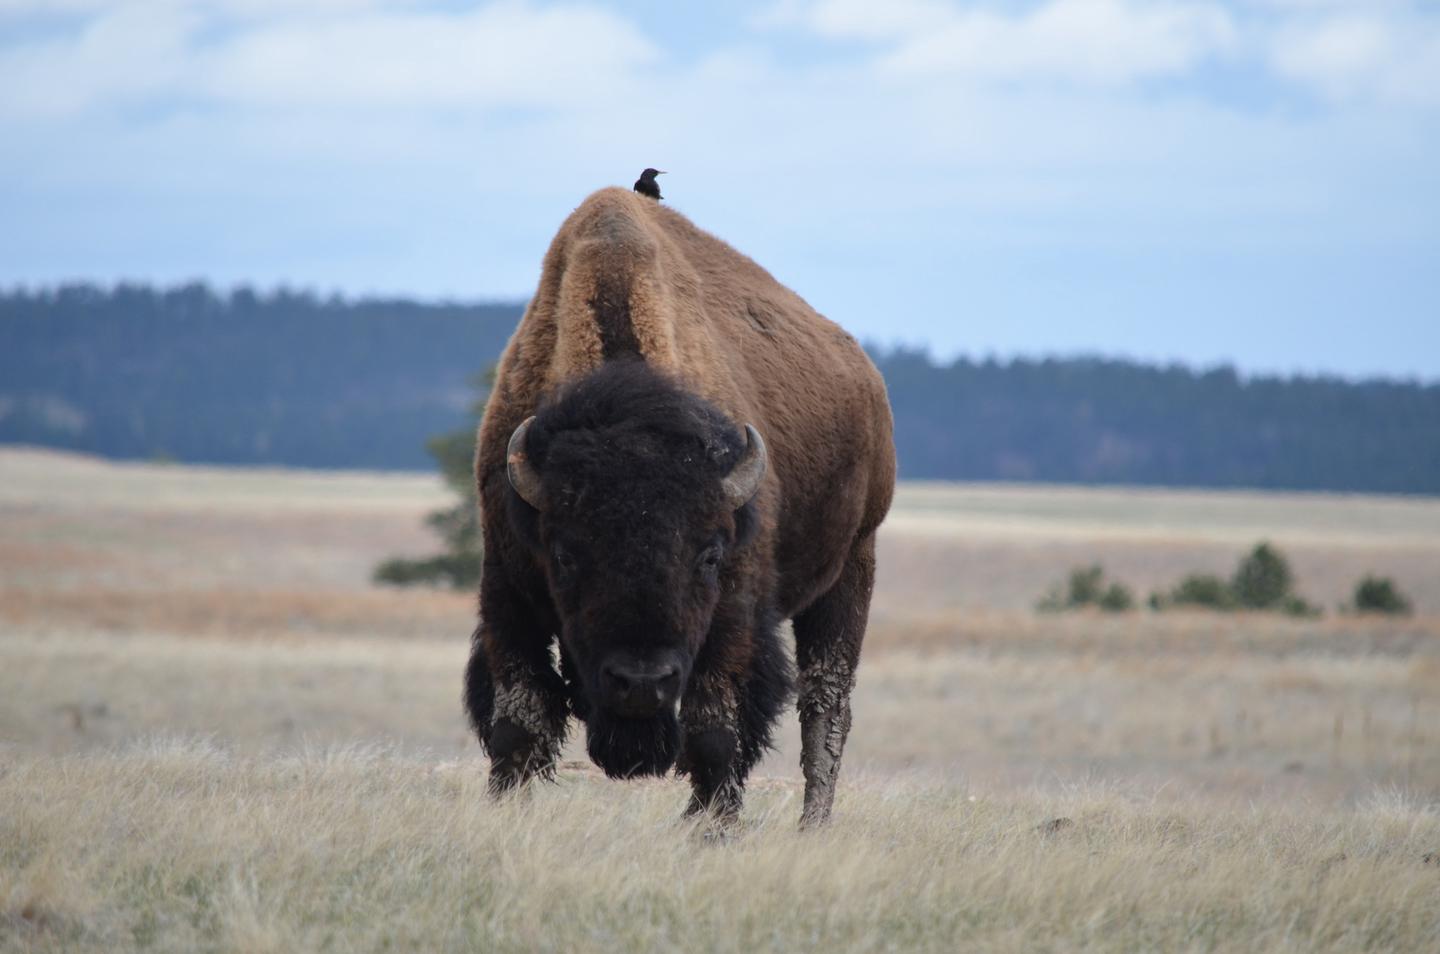 Watchful Bull Bison under a blue sky